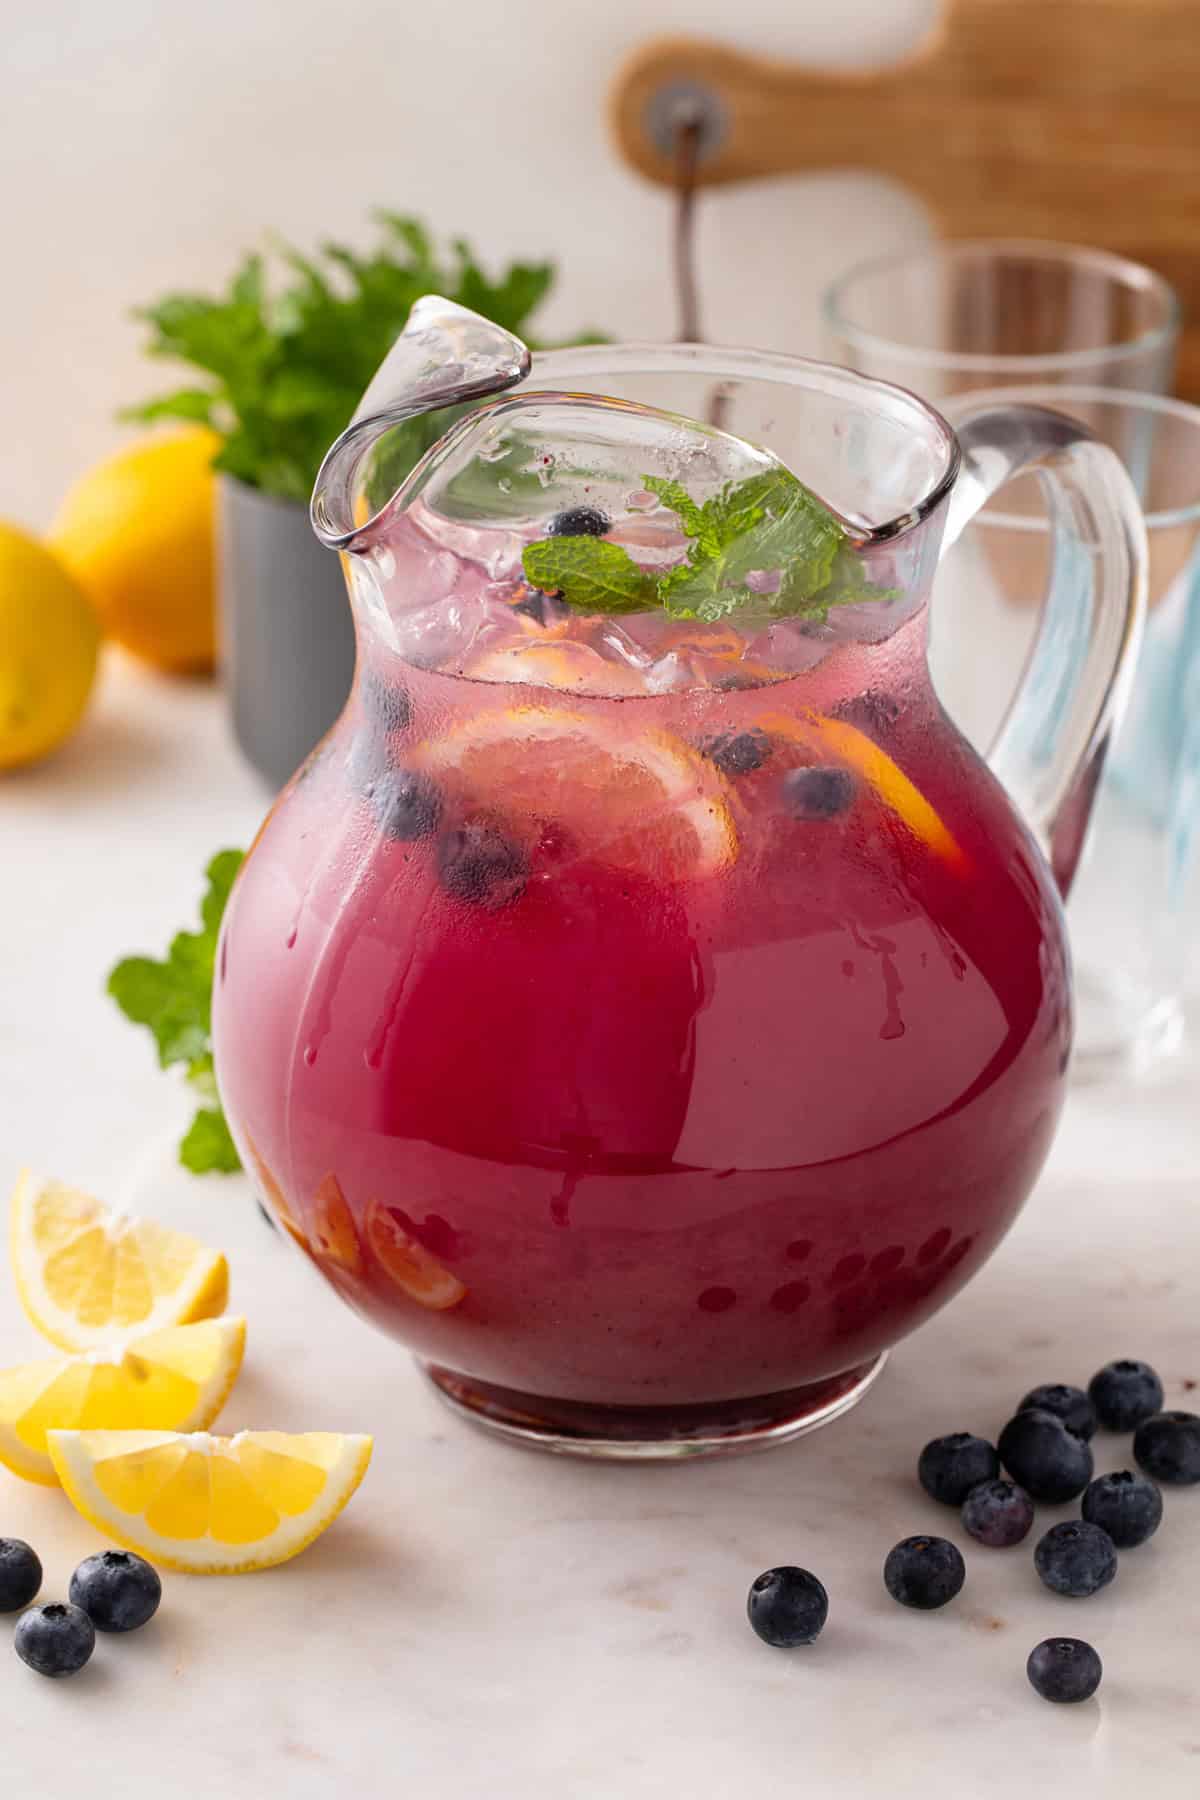 Glass pitcher filled with blueberry lemonade and garnished with lemon slices, fresh blueberries, and mint.